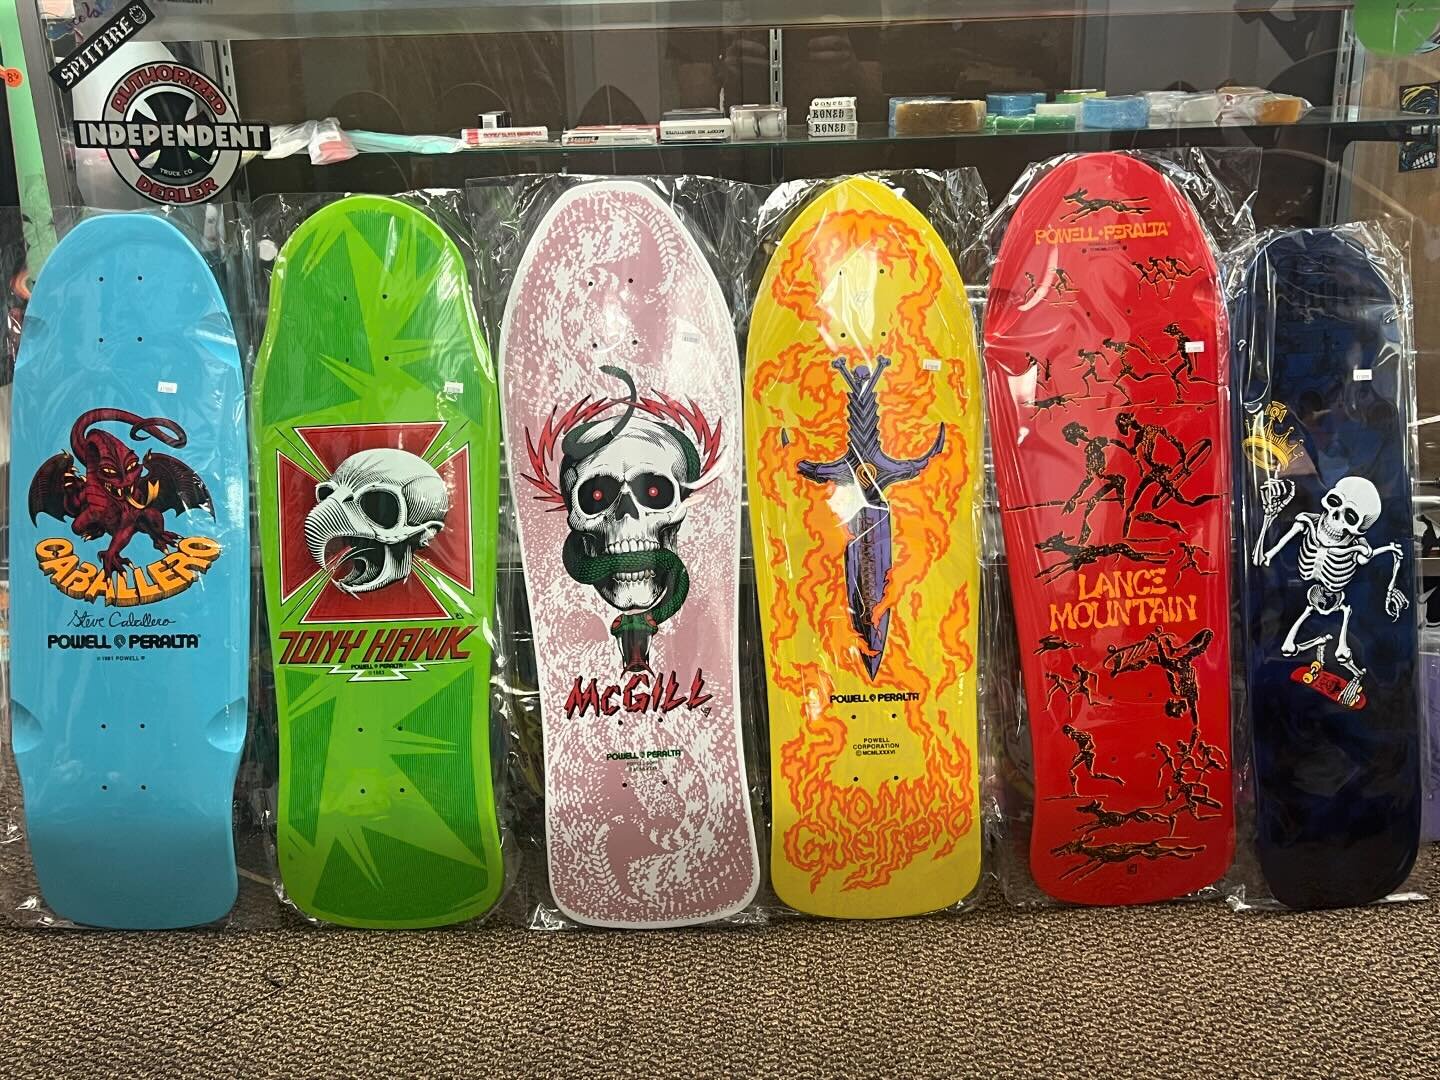 New Bones Brigade series 15 reissues decks are in store! Come by and grab one before they are gone! #classic #powell #reiusse #shoplocal #surfconnection